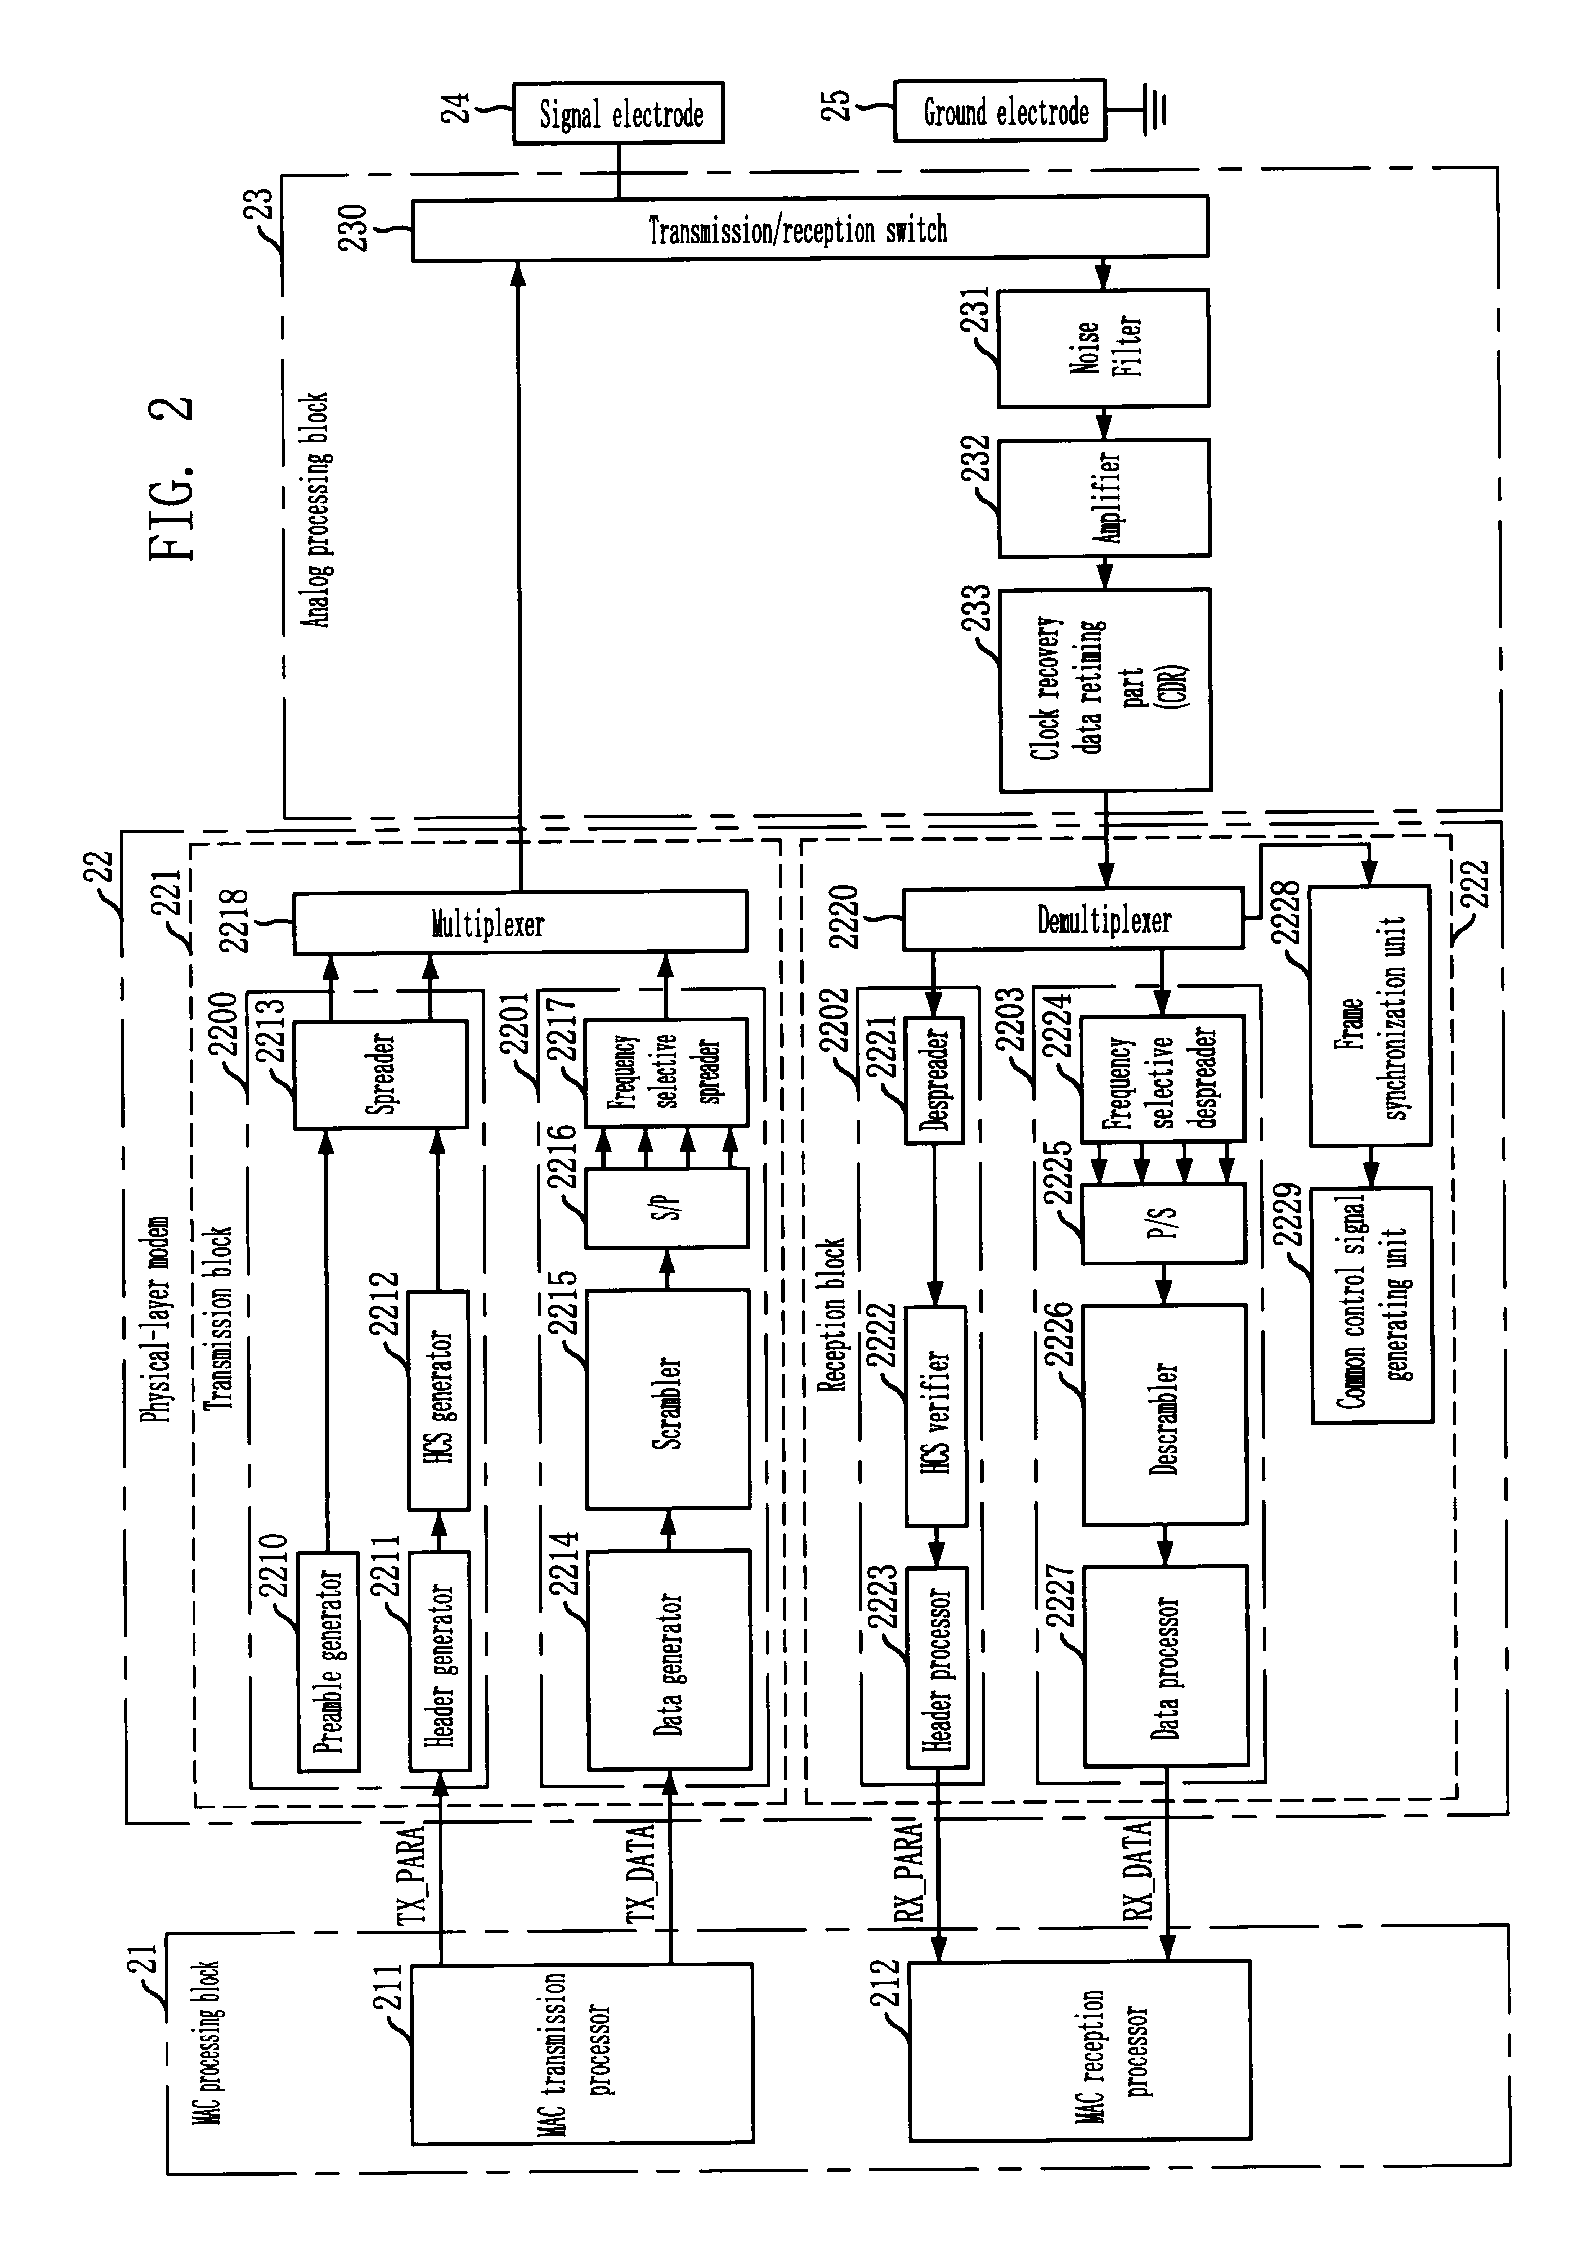 Digital communication system using frequency selective baseband and method thereof